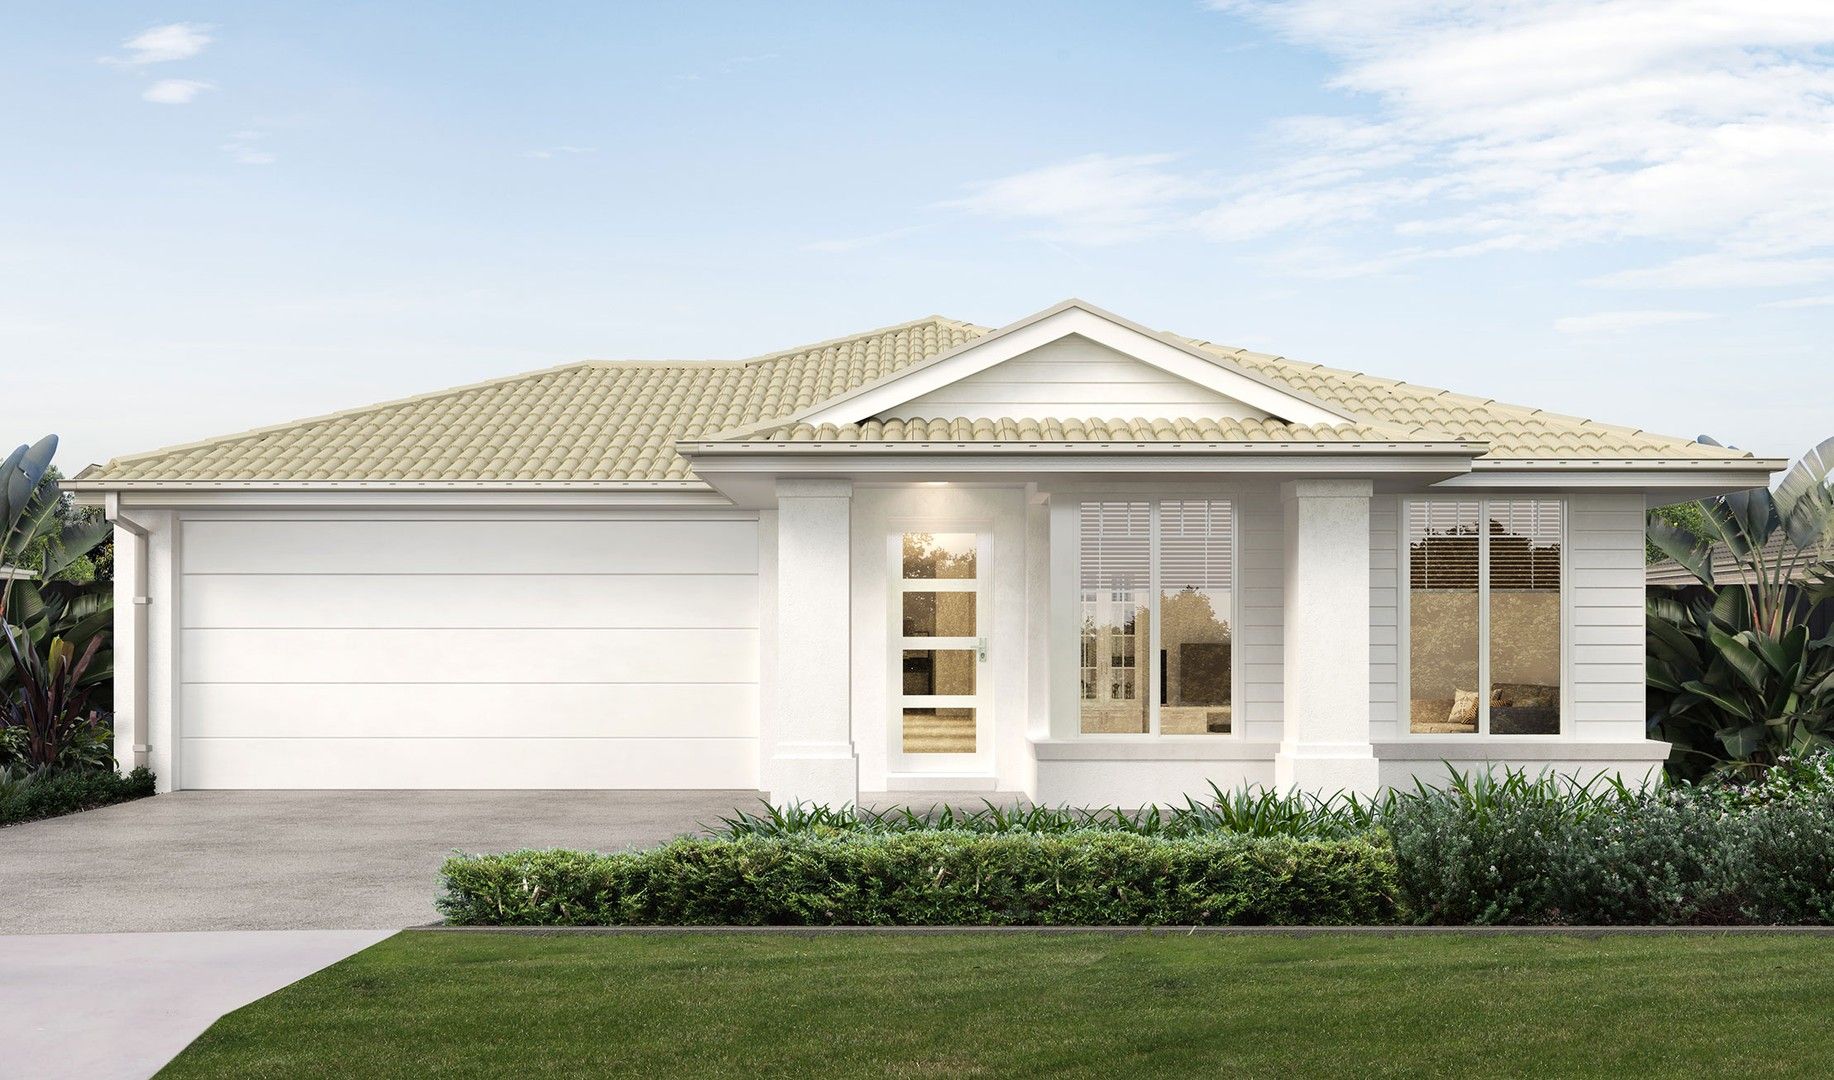 4 bedrooms New House & Land in Lot 4 New Road COLLINGWOOD PARK QLD, 4301